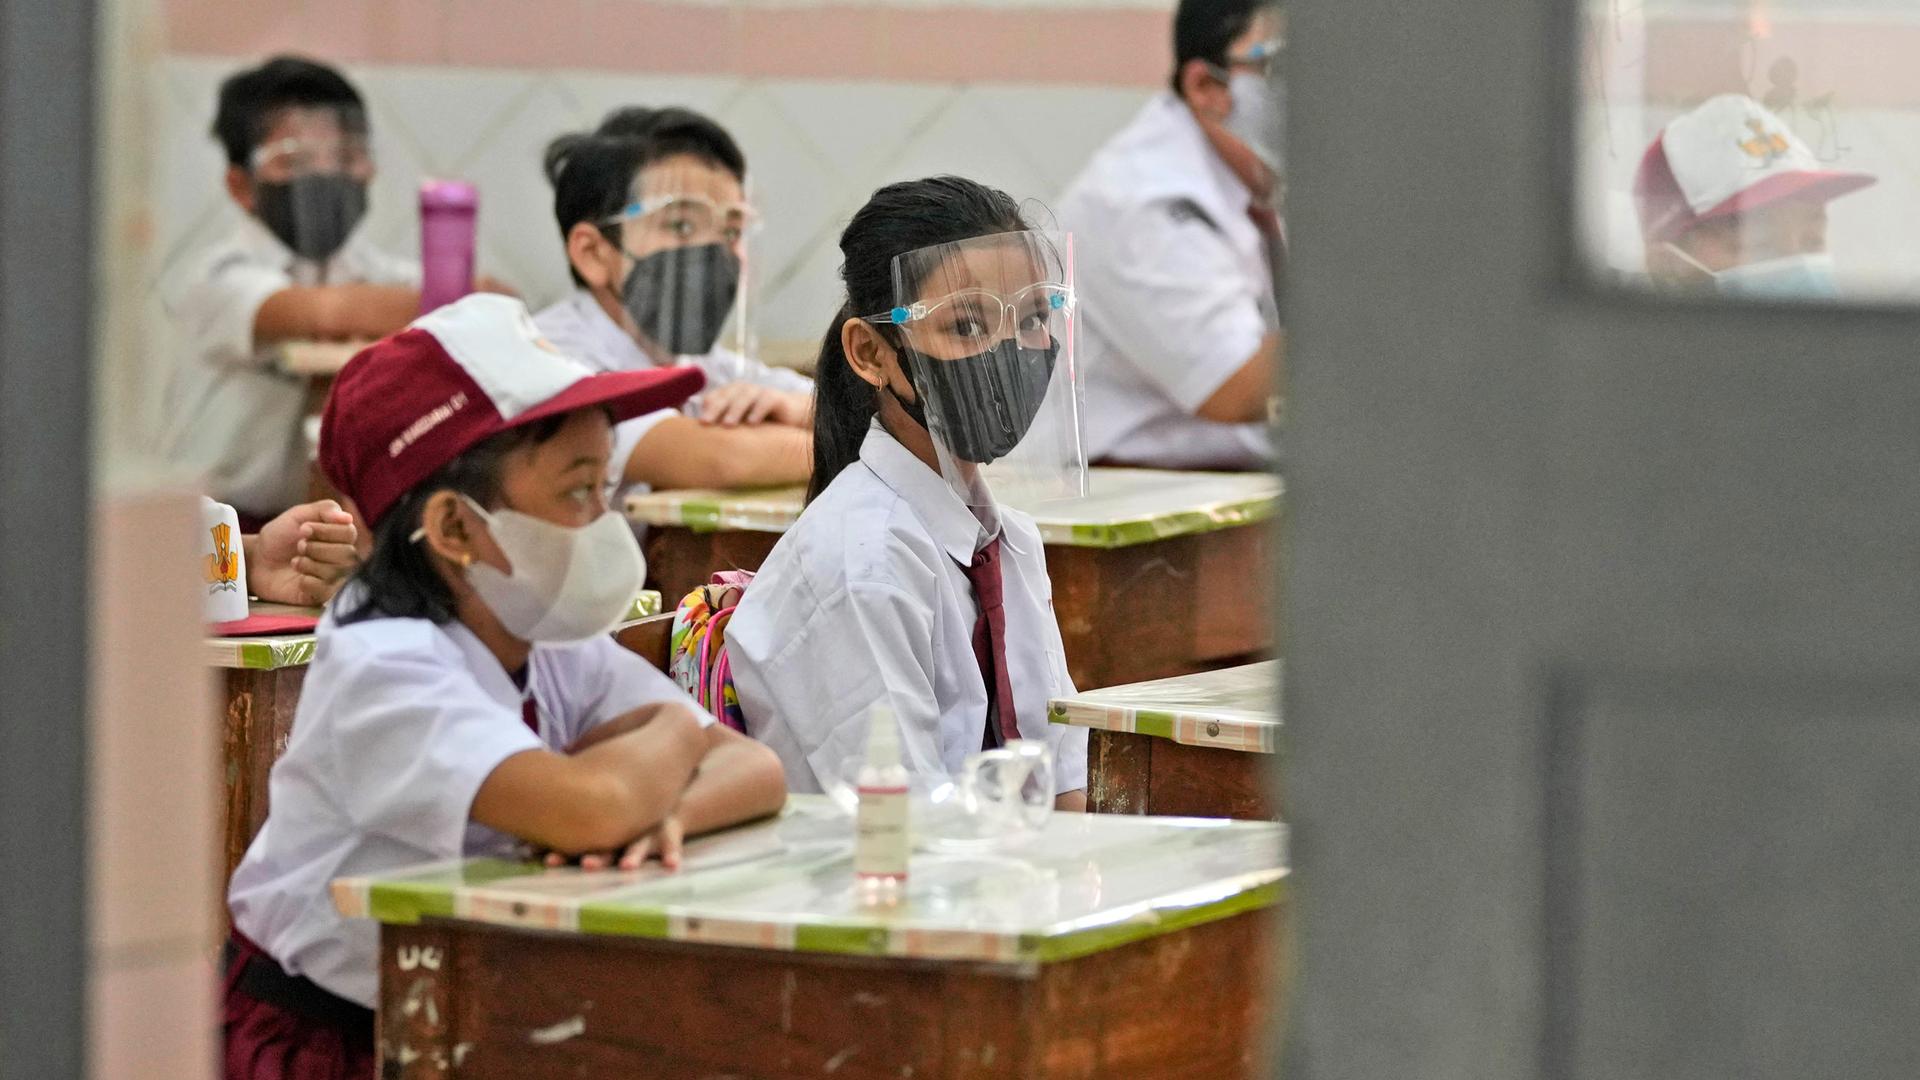 Several young school children are shown sitting at desks with one girl looking back at the camera while wearing a clear face shield and mask.